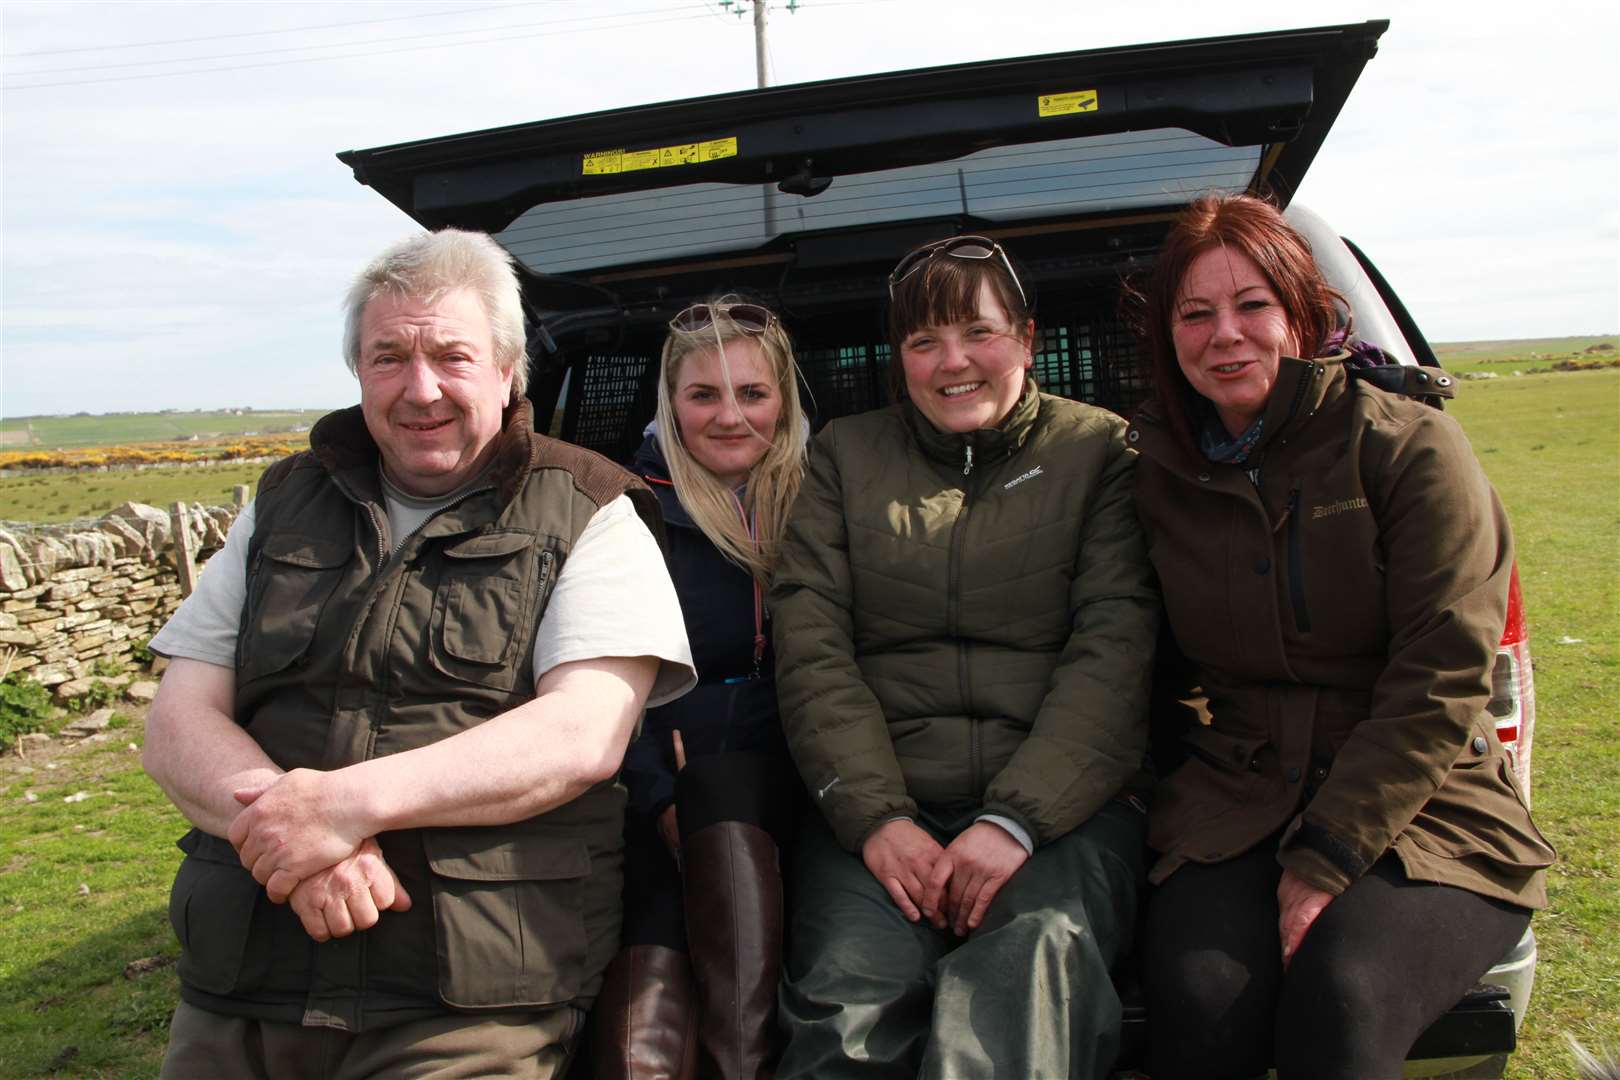 Taking a break during Sunday's trial at Ham Farm (from left) judge Jock Mackenzie with organisers Kelsey Keith, Kirsteen Thorburn and Tina Coghill Robertson.